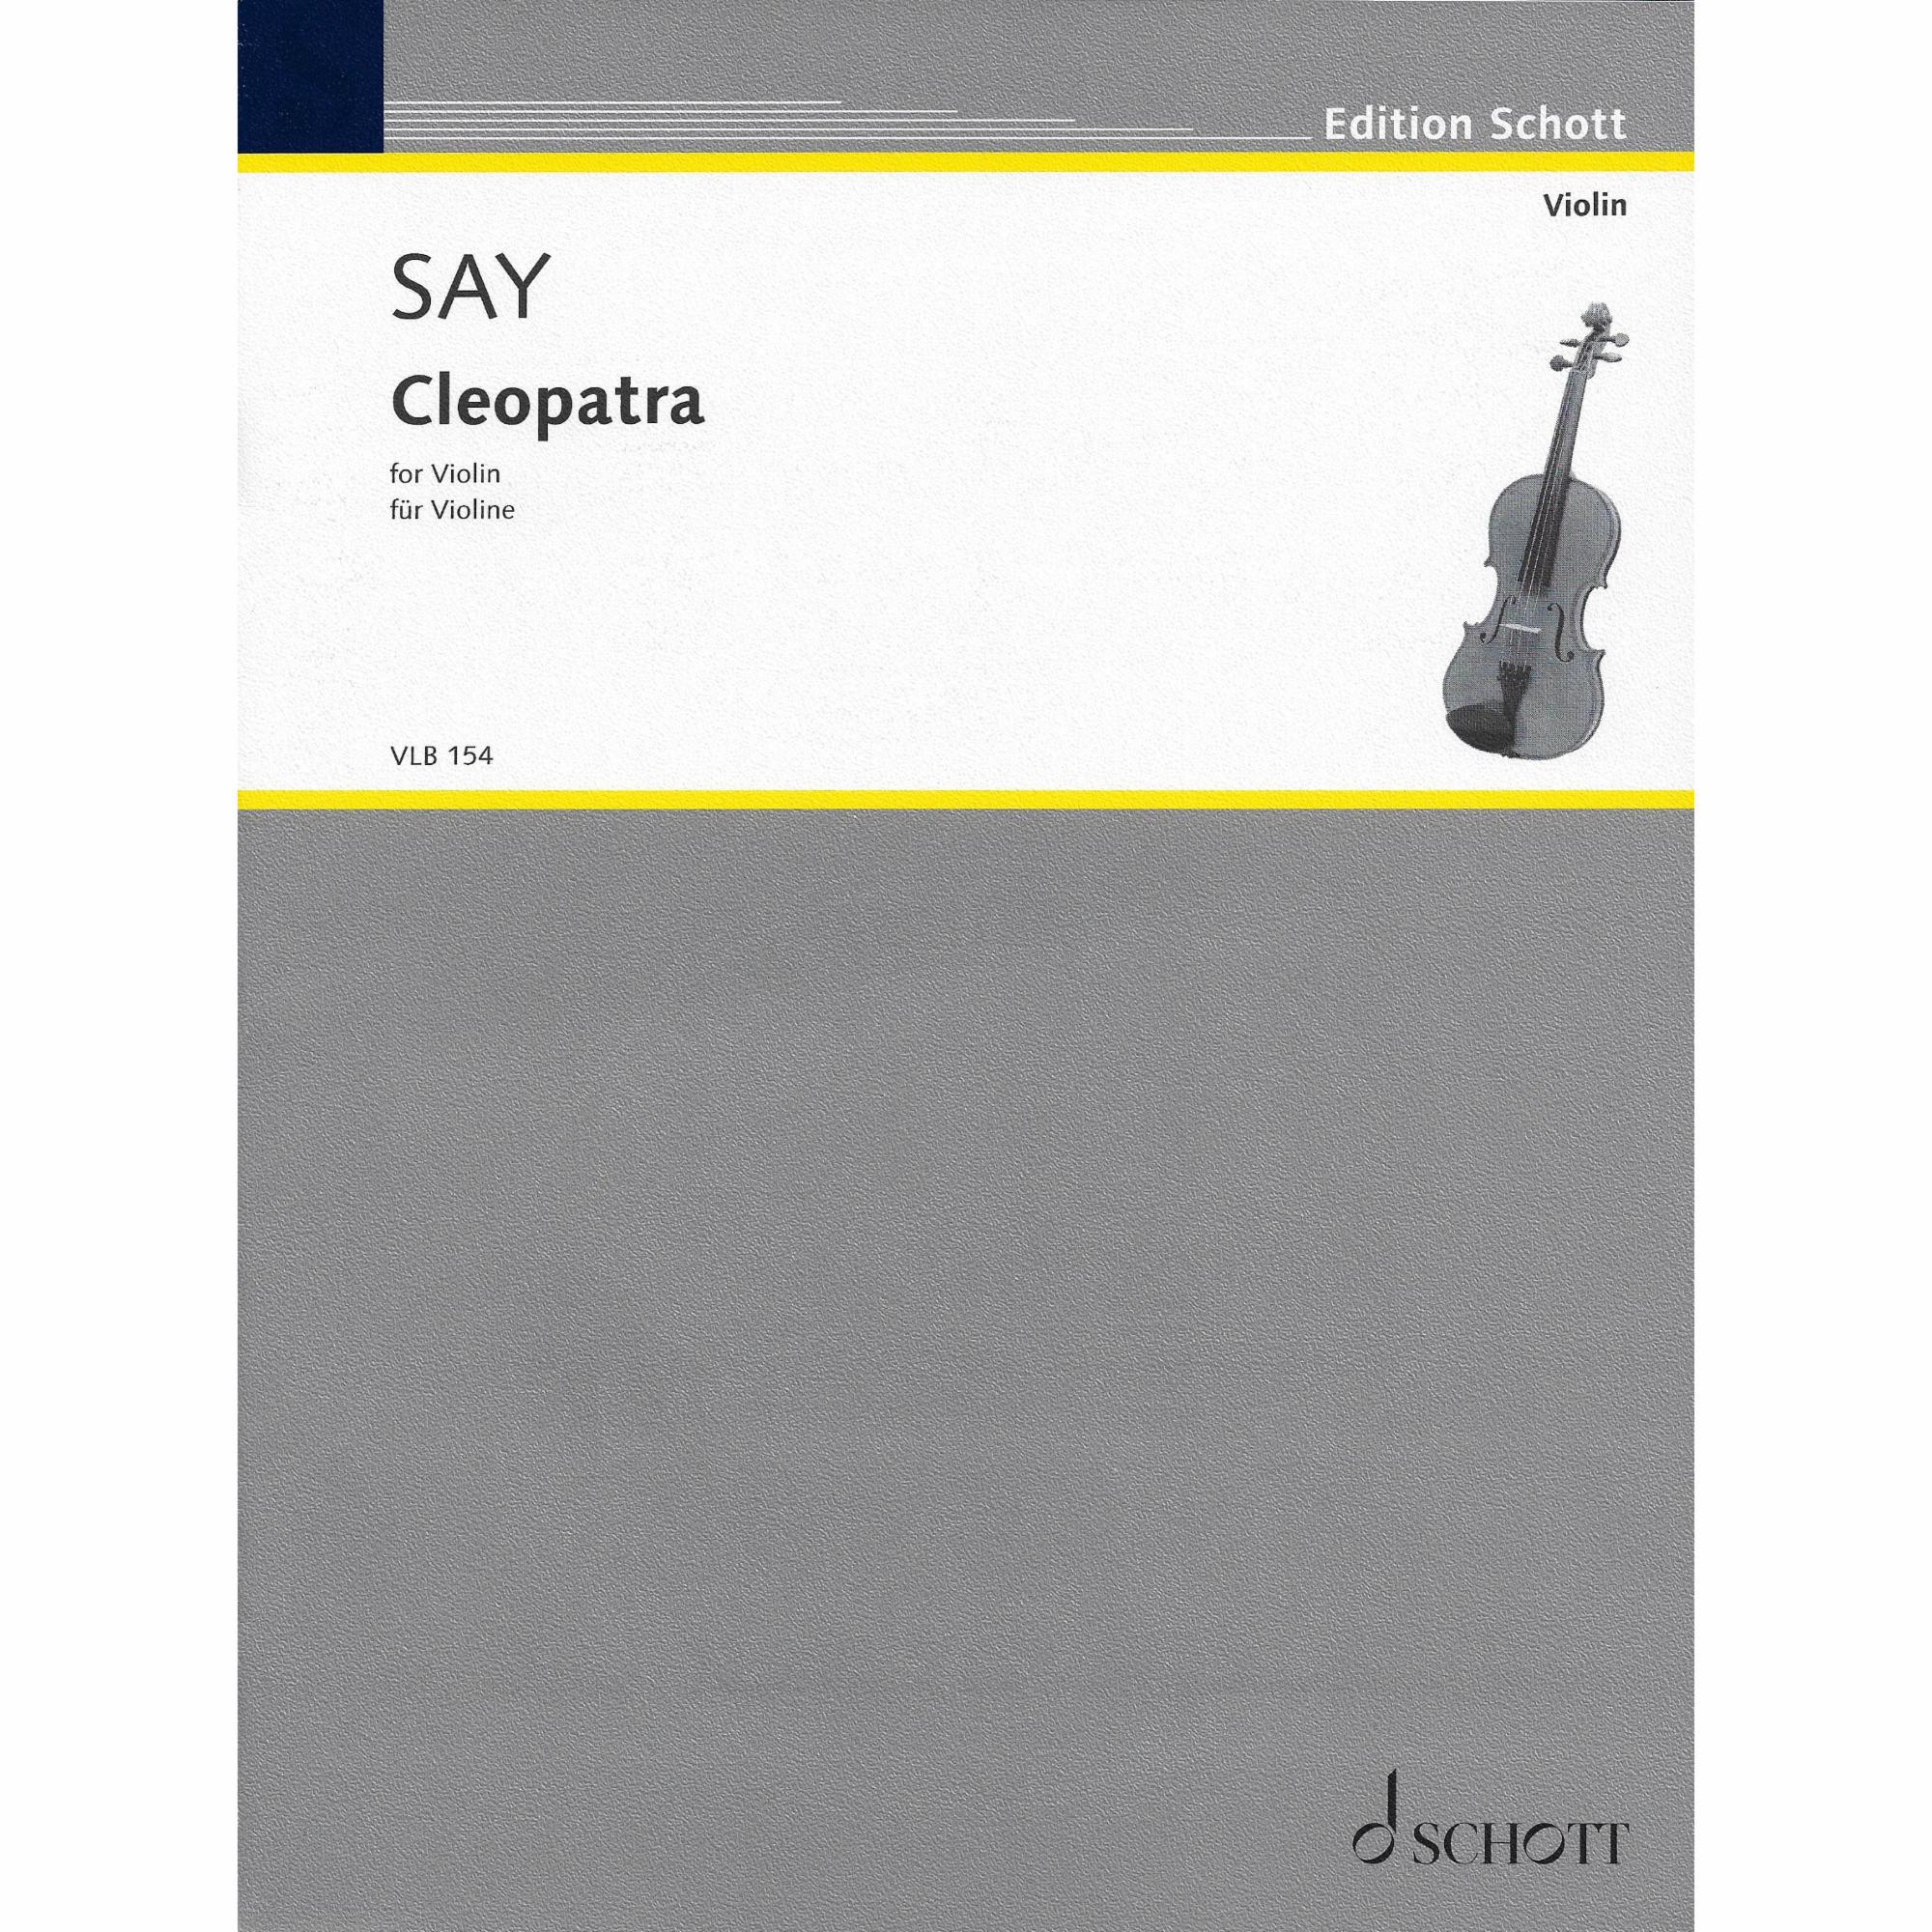 Say -- Cleopatra, Op. 34 for Solo Violin